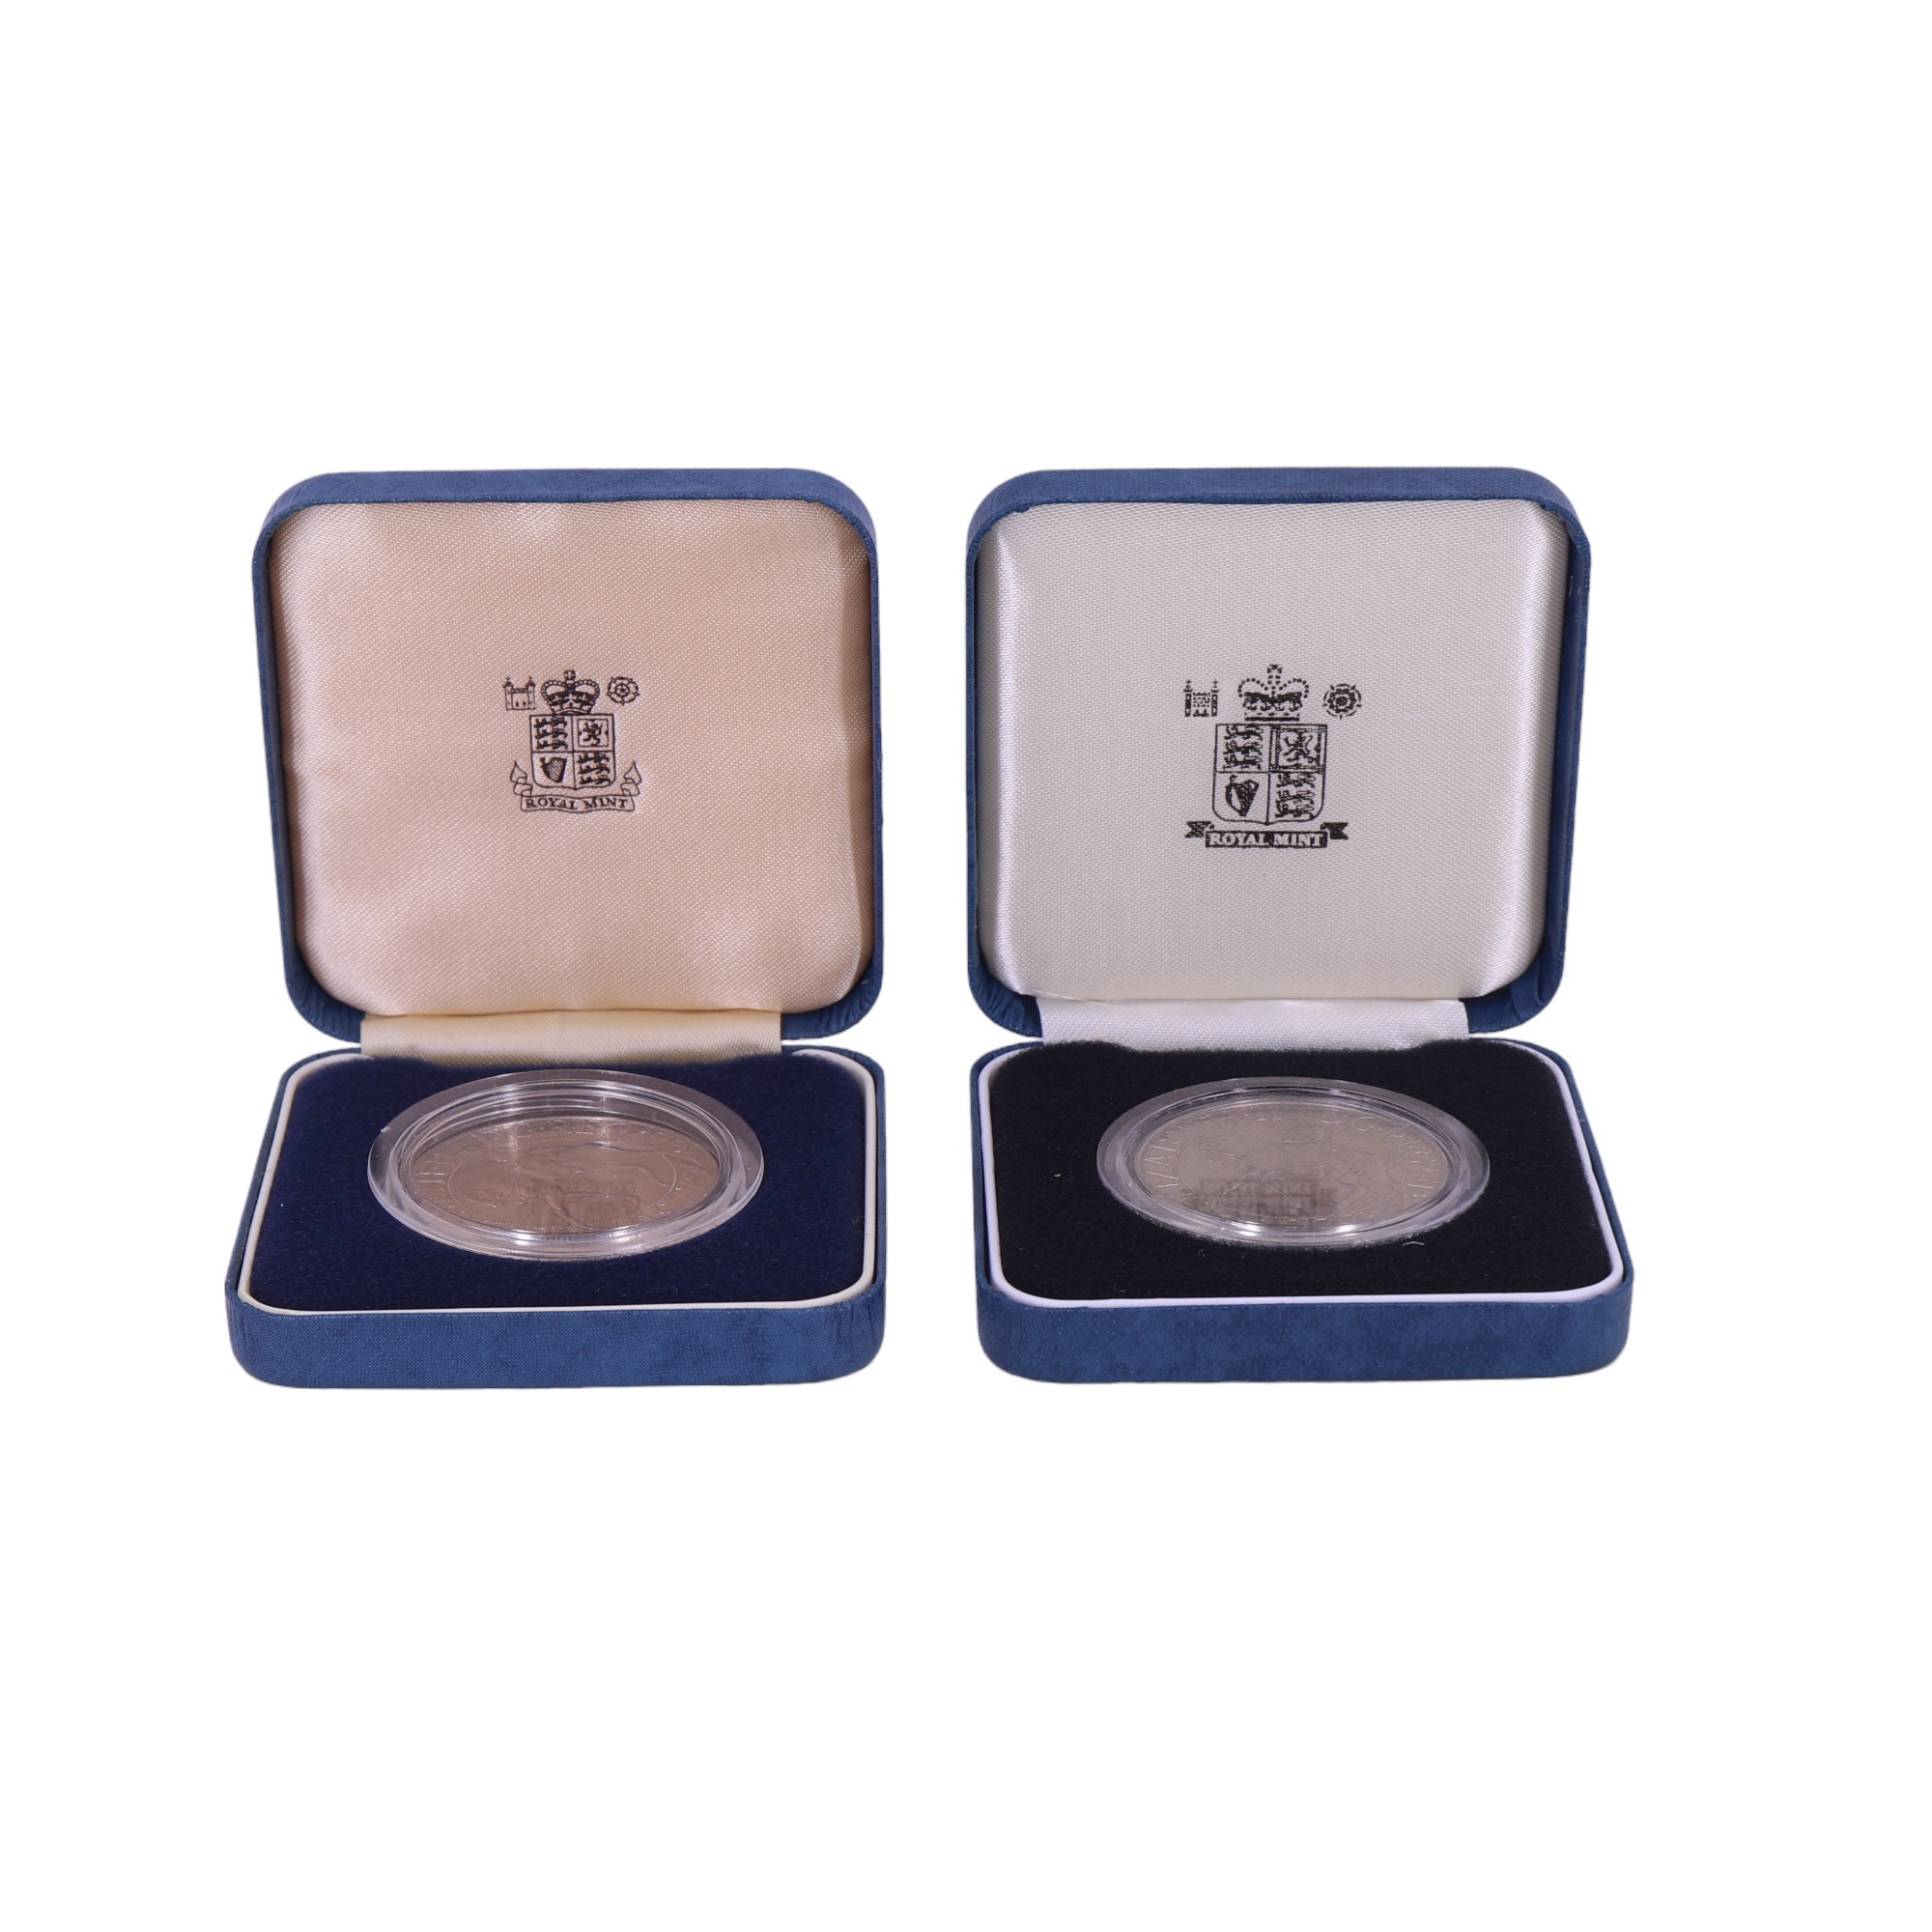 Two cased silver 1977 royal commemorative crowns together with related Pleasington Parish Council